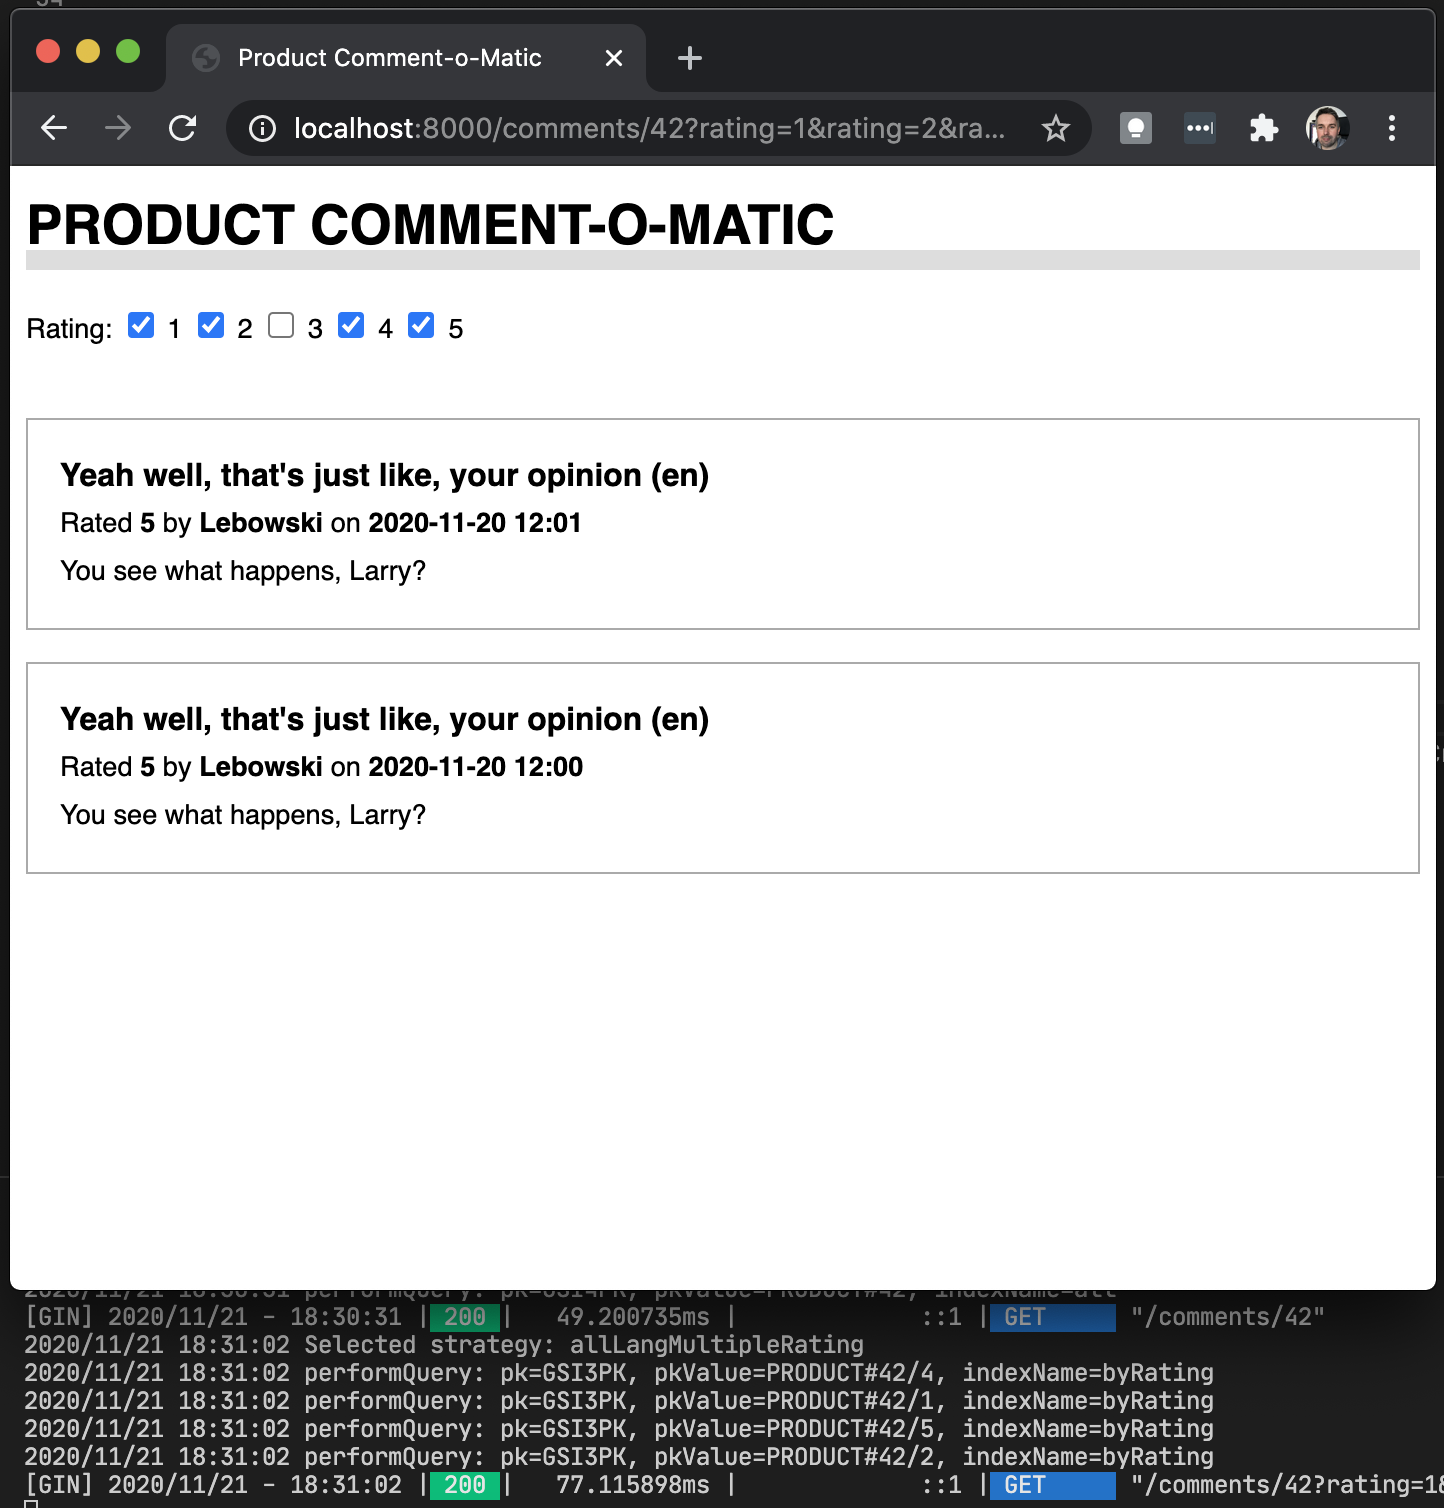 Product comments UI, ratings 1, 2, 4 and 5 switched on